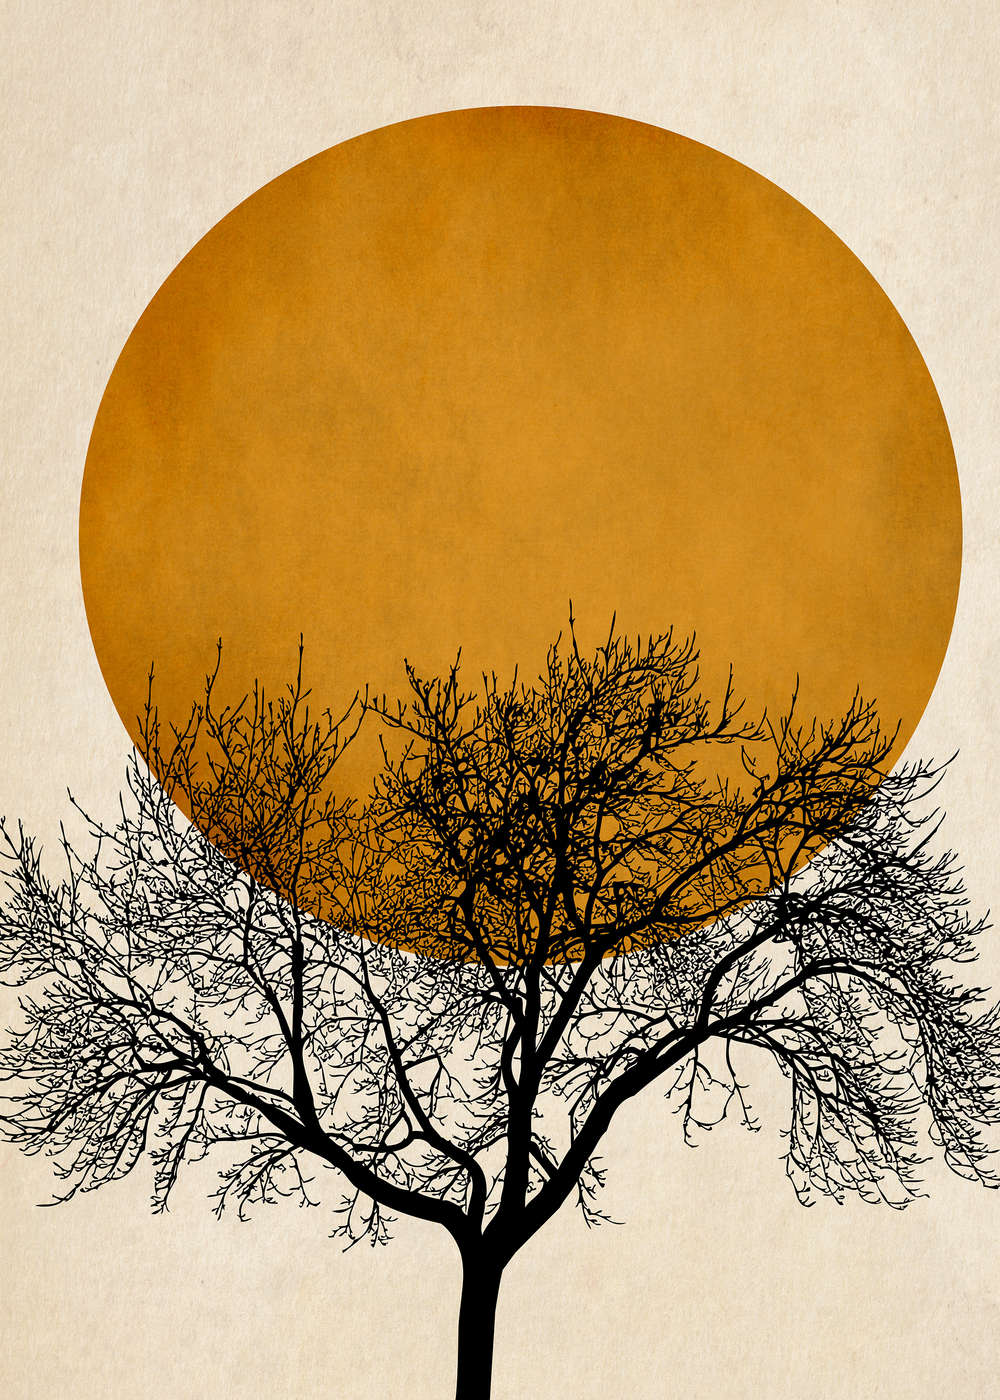             Photo wallpaper tree crown shadow cut with gold sun
        